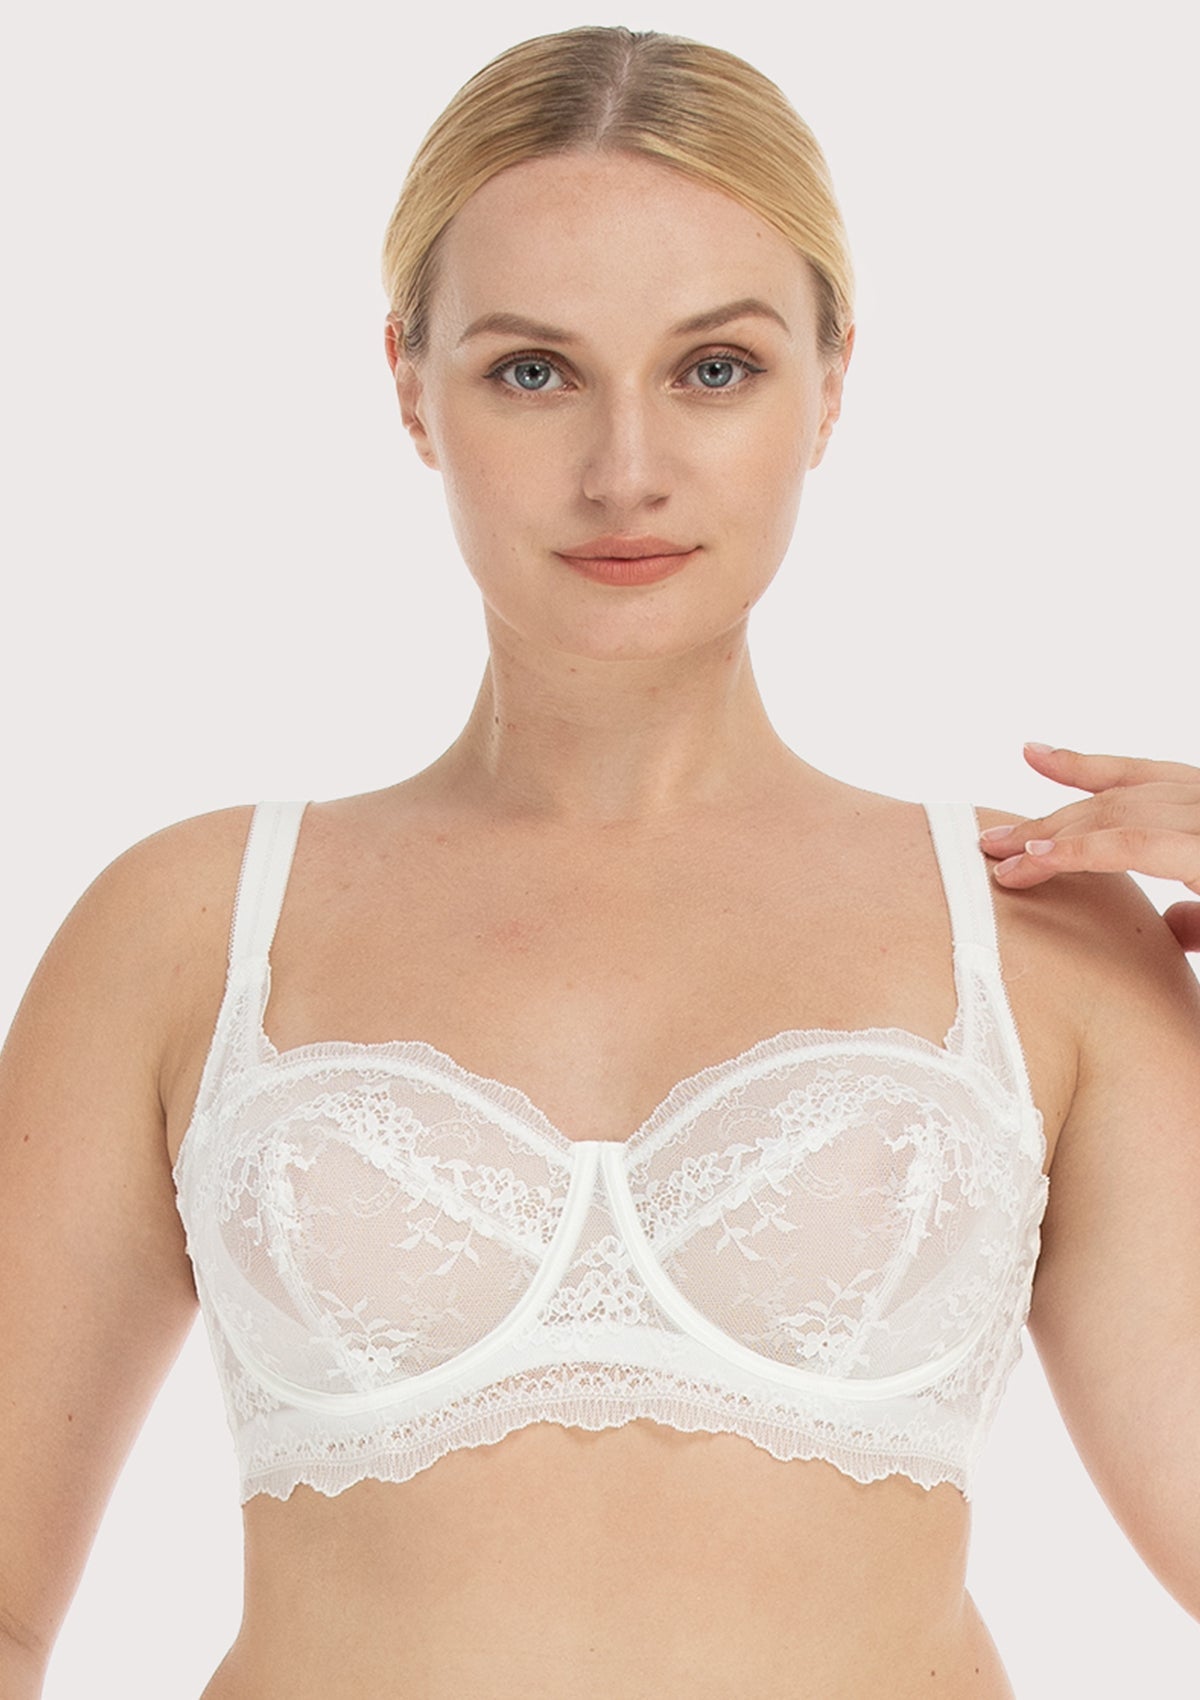 HSIA I Do Floral Lace Bridal Balconette Beautiful Bra For Special Day - Burgundy / 38 / D